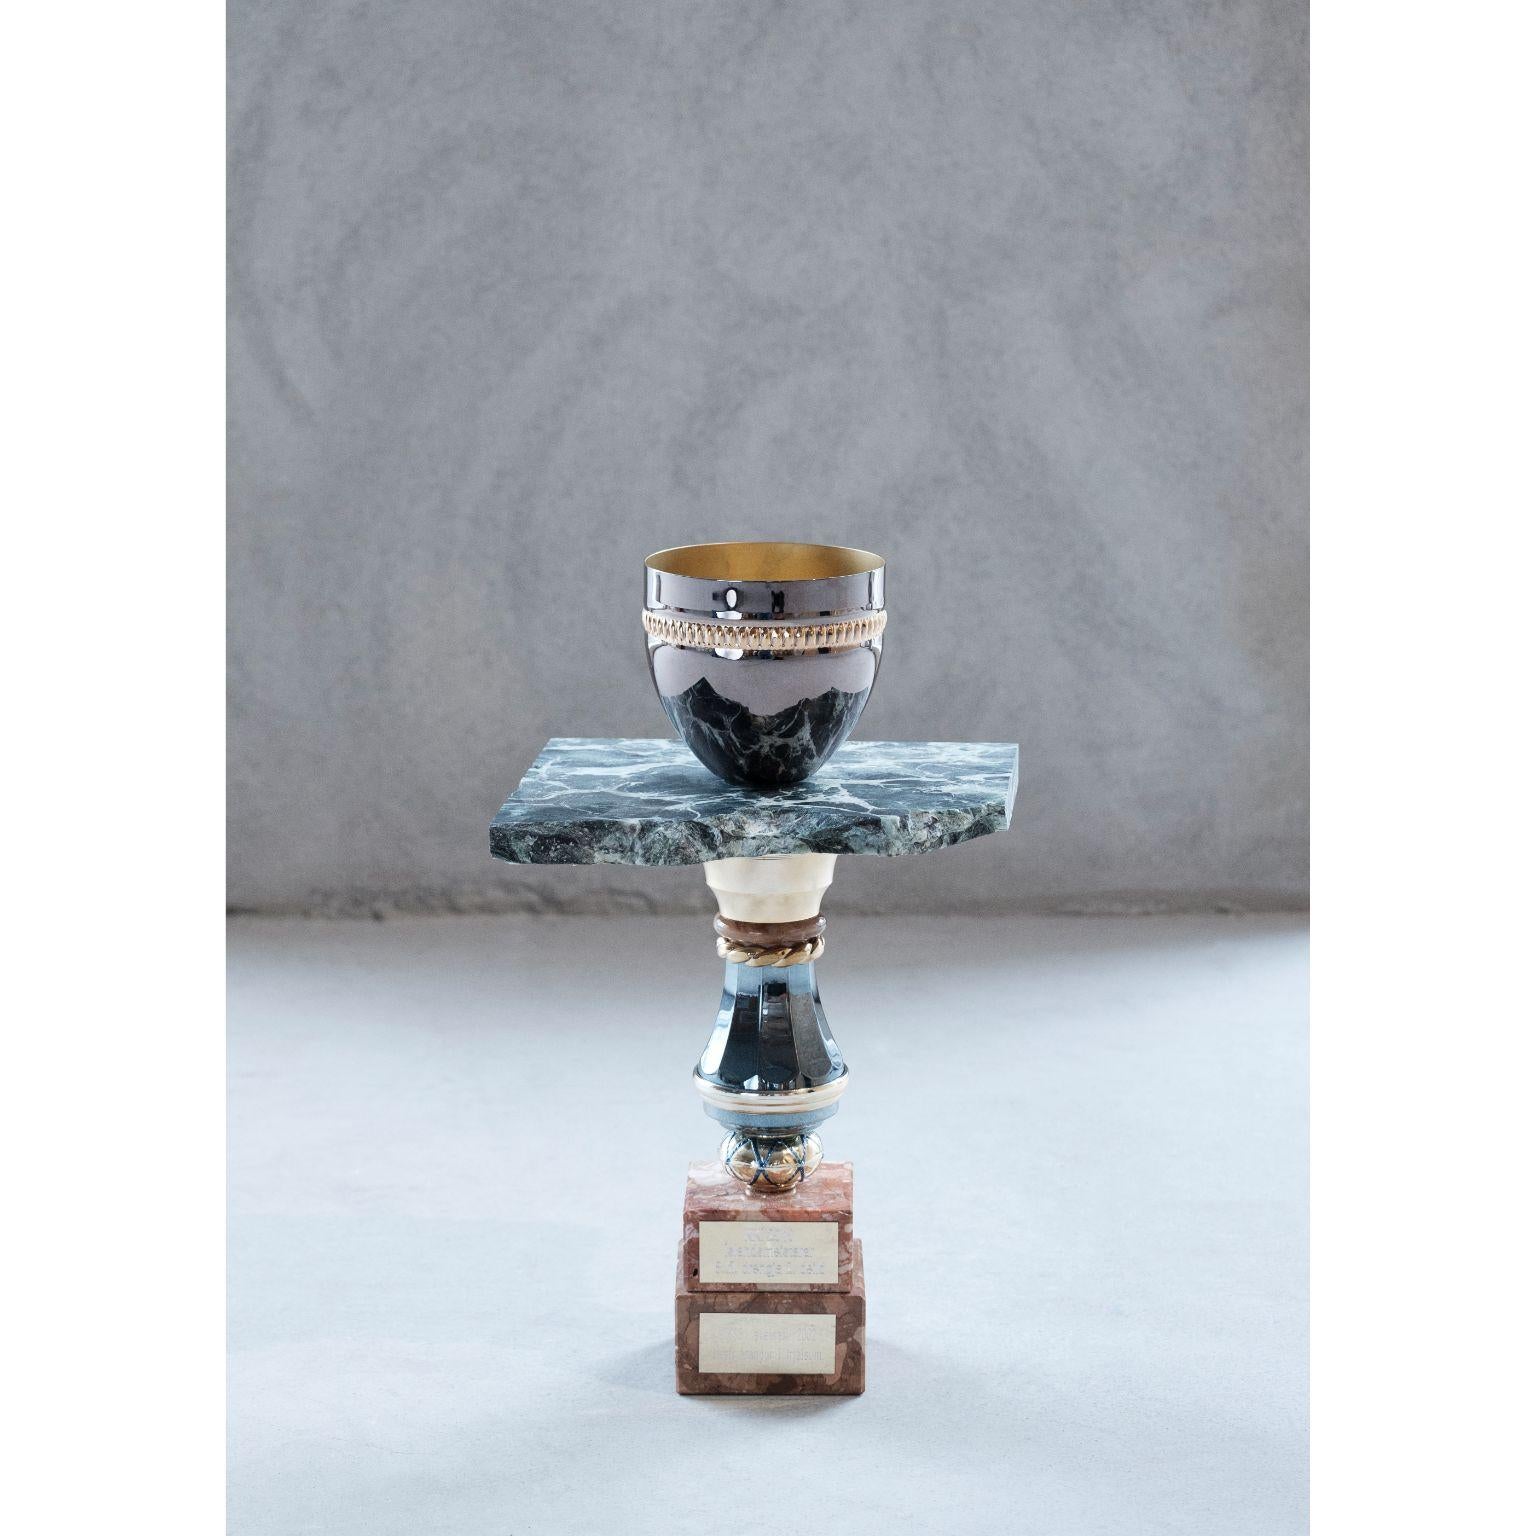 The Green marble flower pot by Flétta
Dimensions: 40 x 20 cm
Materials: green marble

Trophy is a collection of tables, lights, flowerpots and shelves made of old trophies collected from athletes and sports clubs in Iceland. Trophies are a part